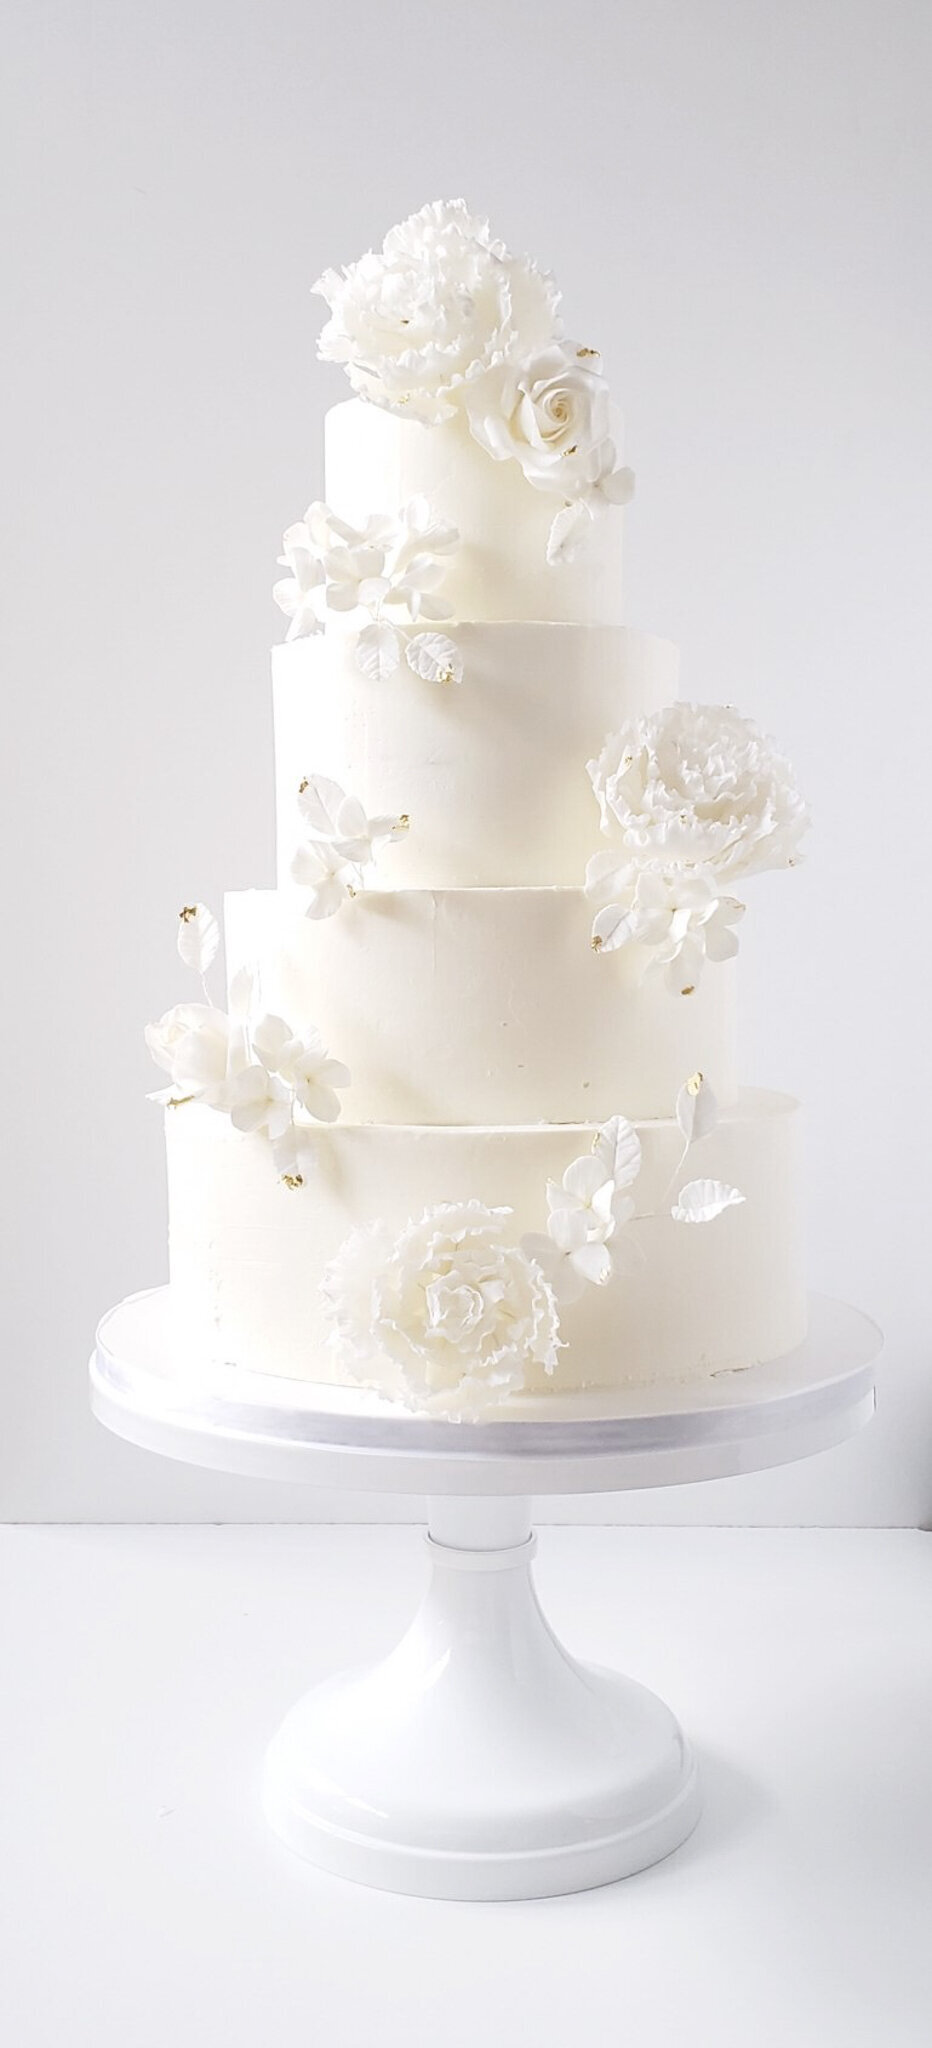 Elegant and timeless four-tiered white wedding cake, decorated with classic white sugar roses, created by Brianne Gabrielle Cakes,  elegant cakes & desserts in Edmonton, AB, featured on the Brontë Bride Vendor Guide.